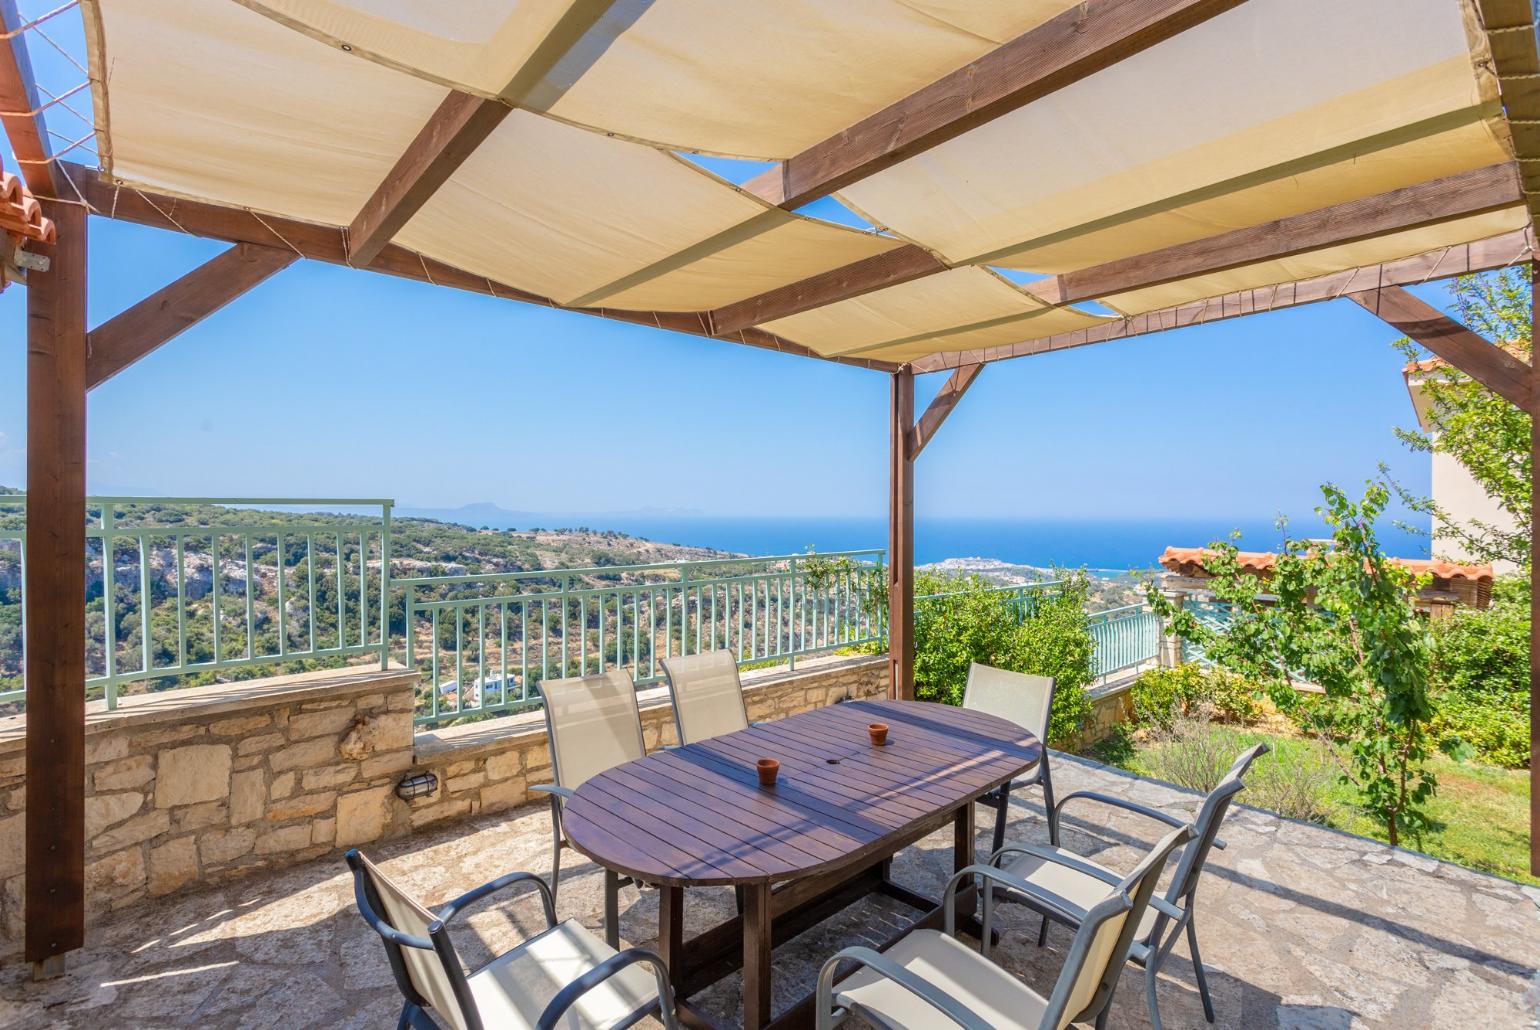 Terrace area with BBQ and sea views